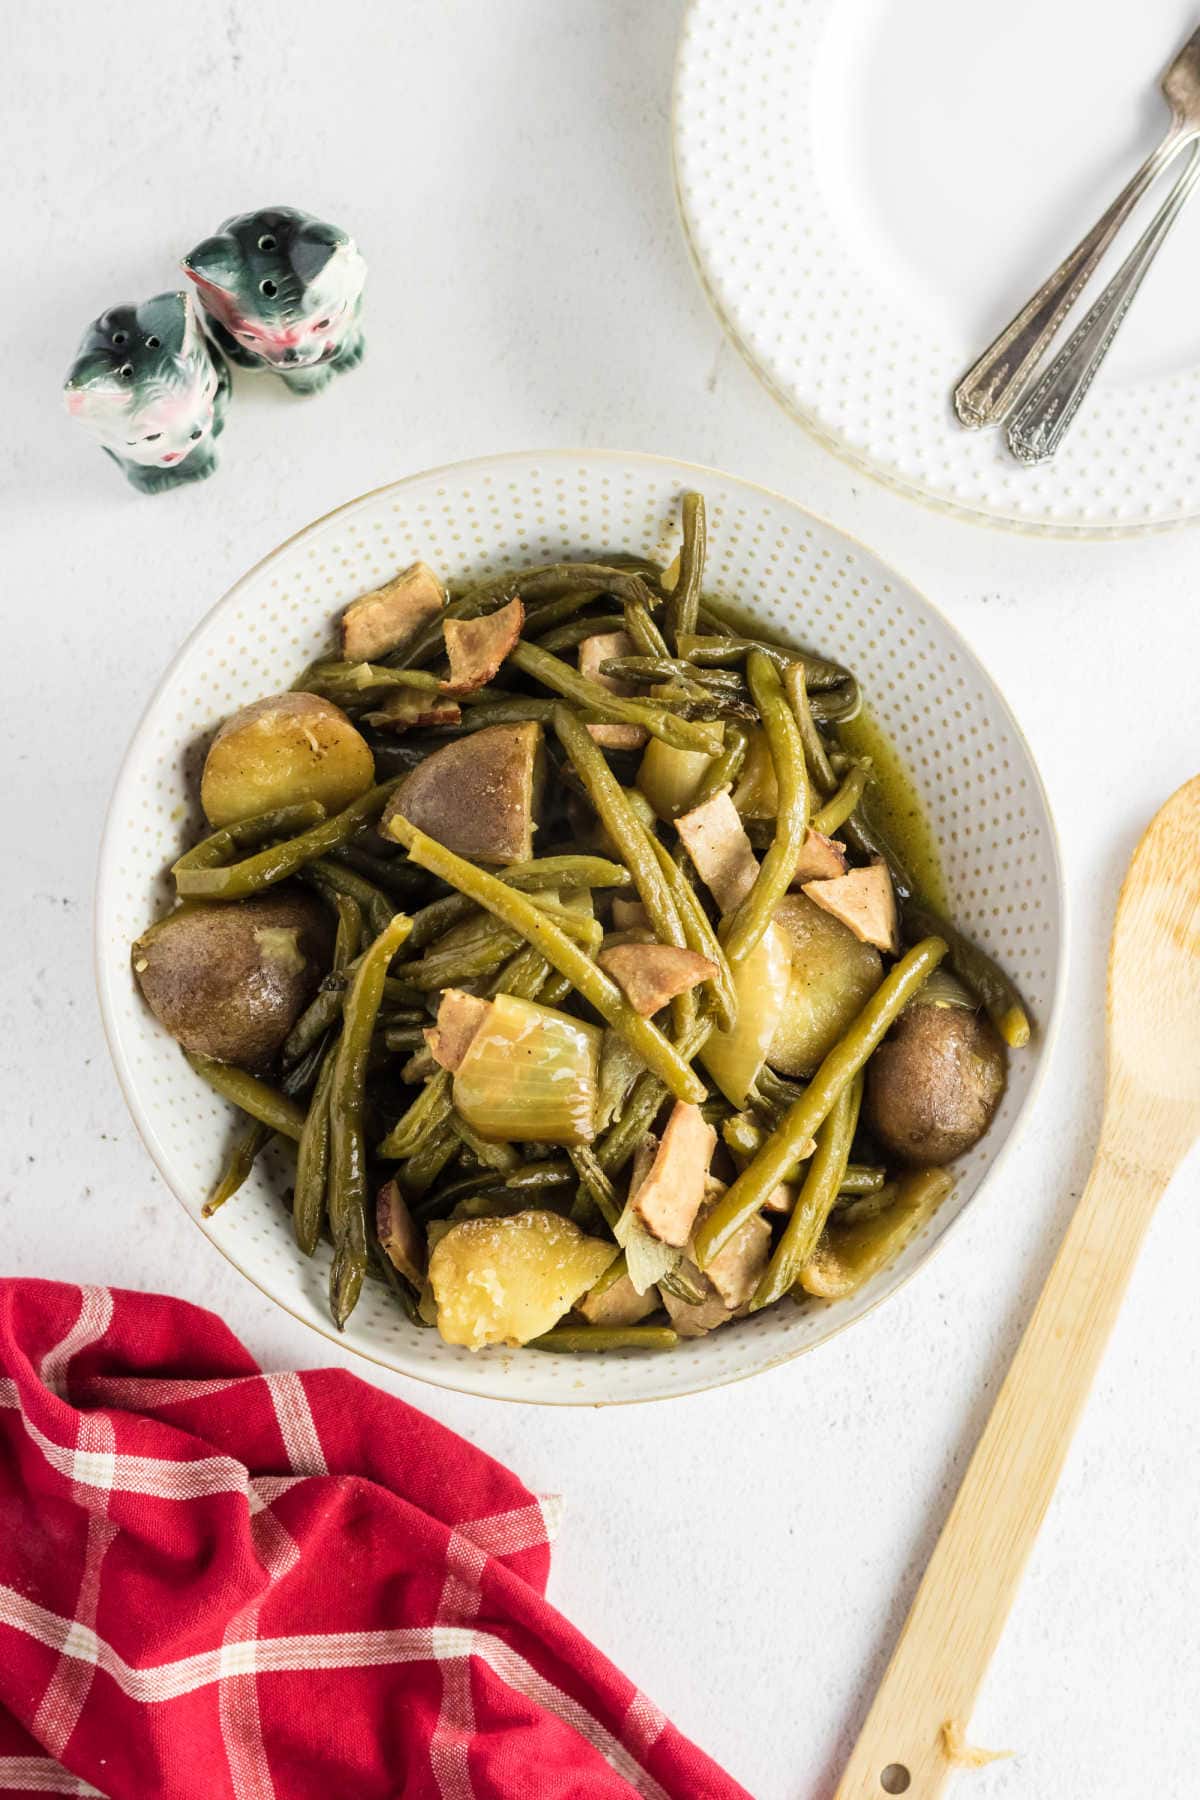 Green beans, potatoes, and ham in a serving dish on the table.